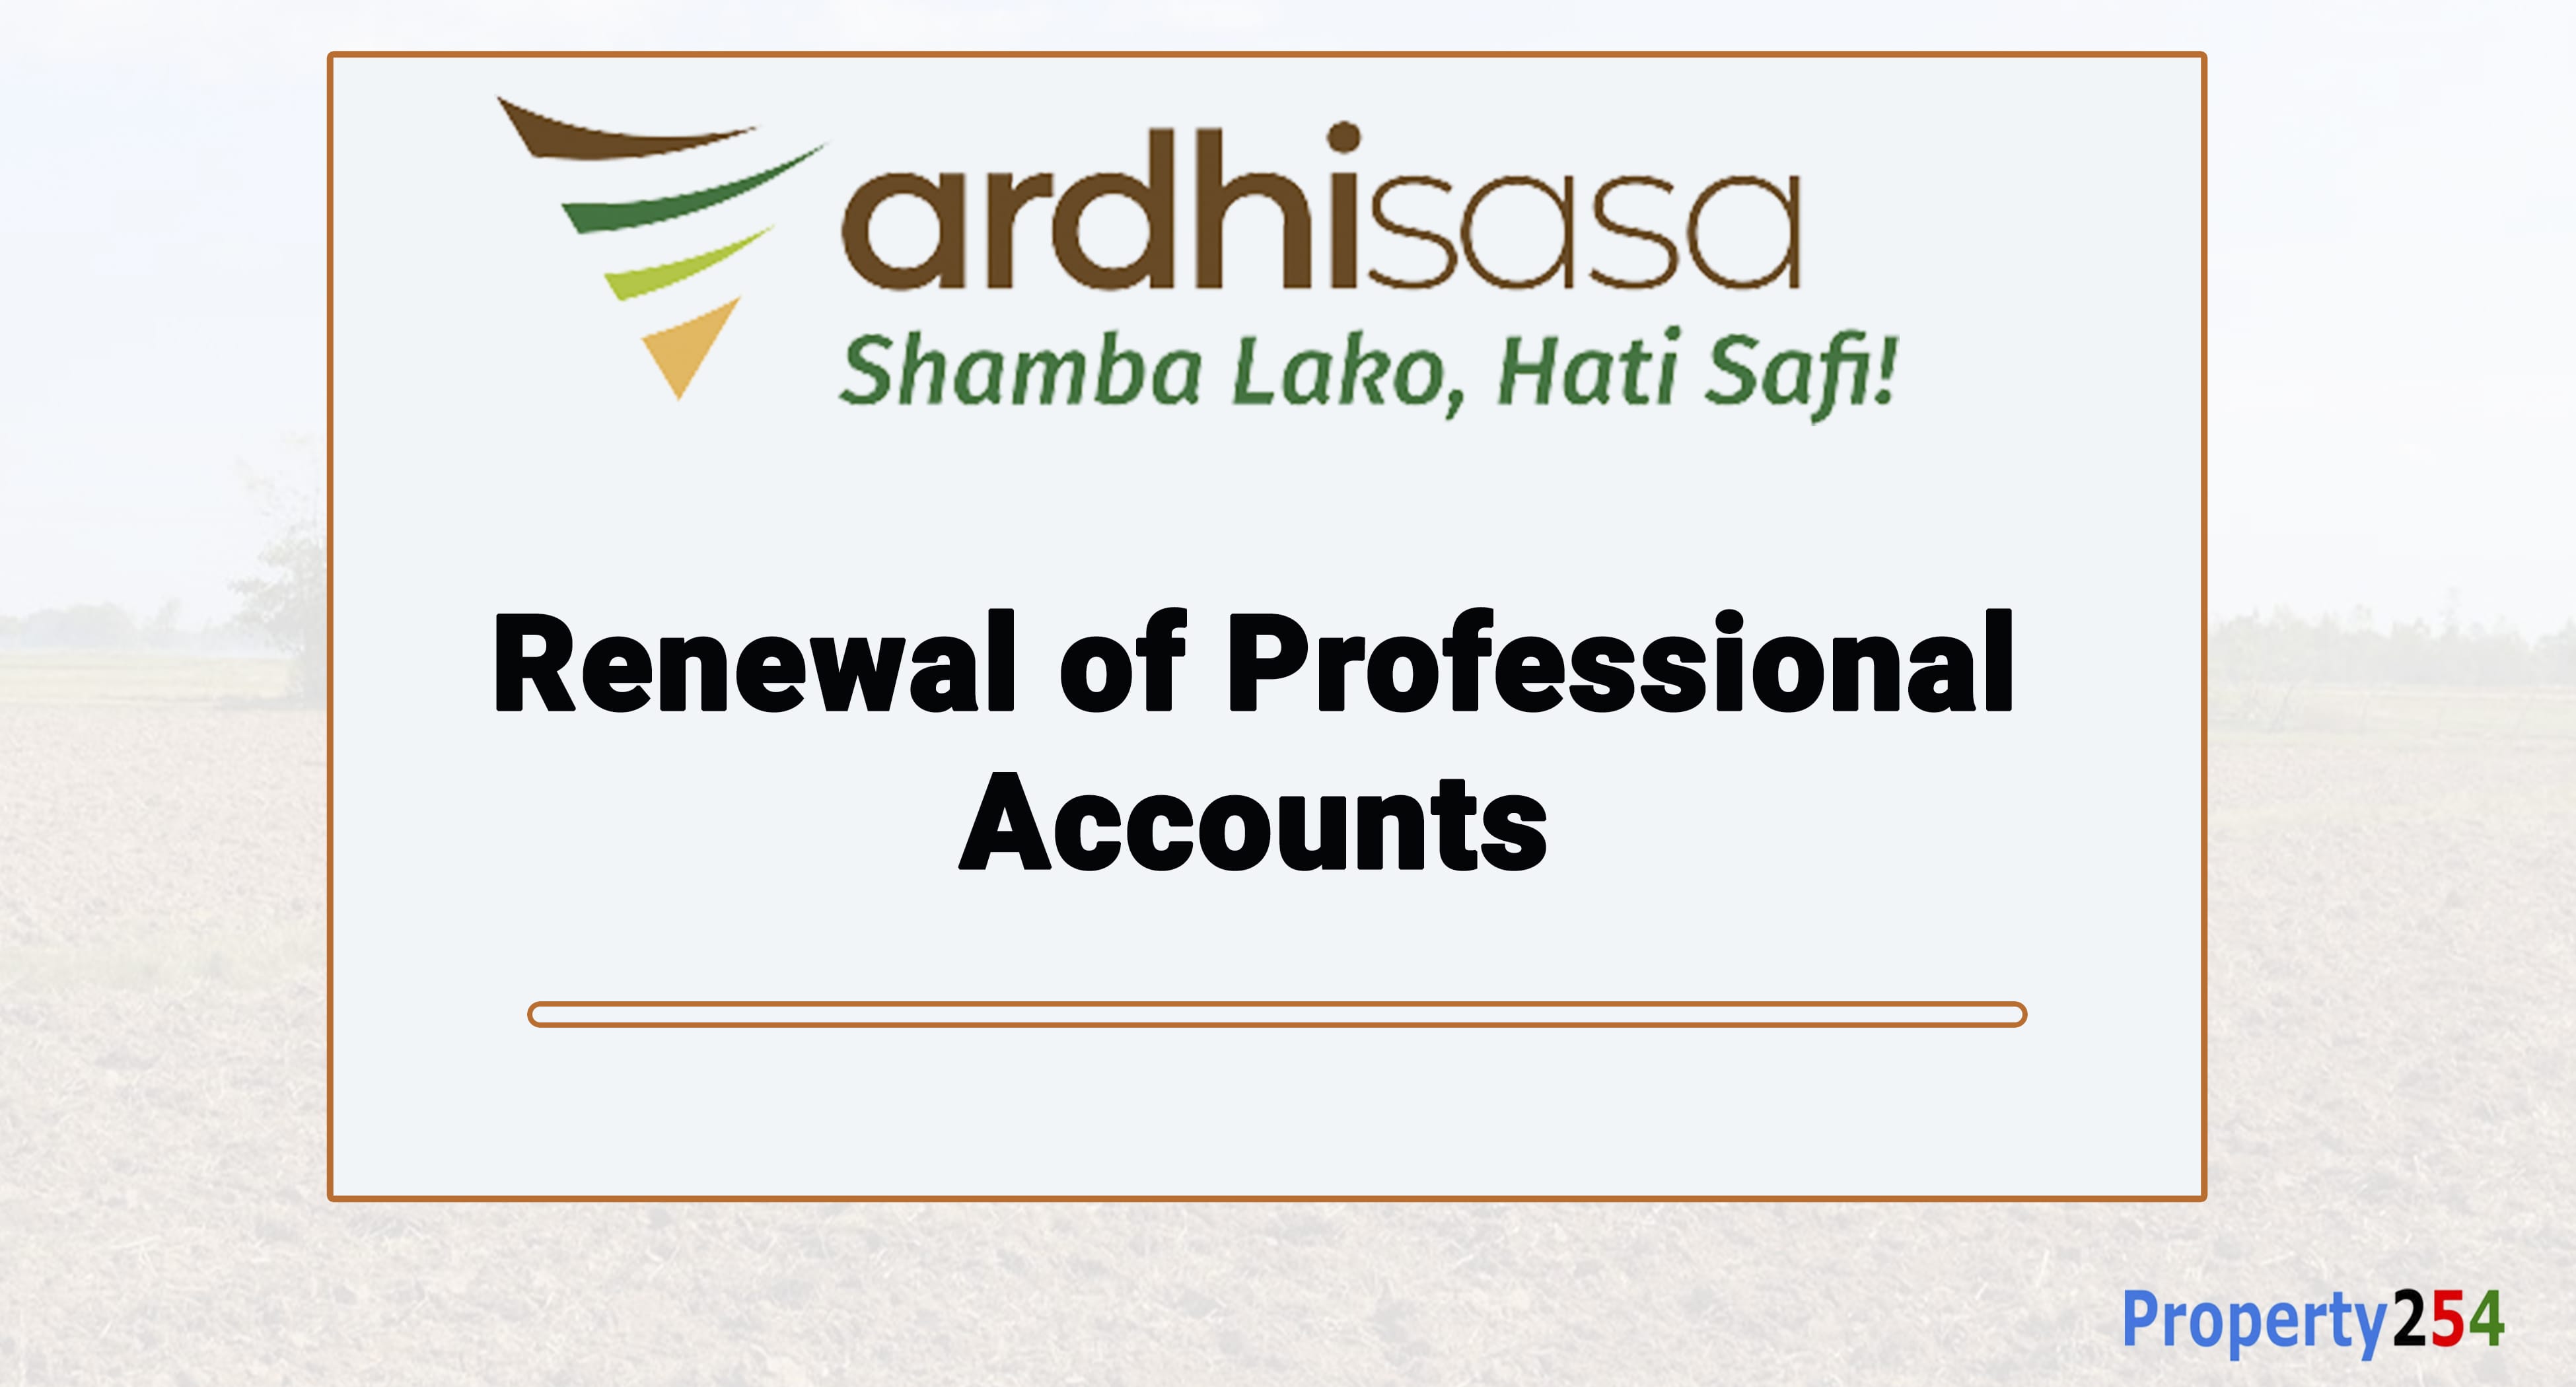 How to Renew a Professional Account on Ardhisasa thumbnail